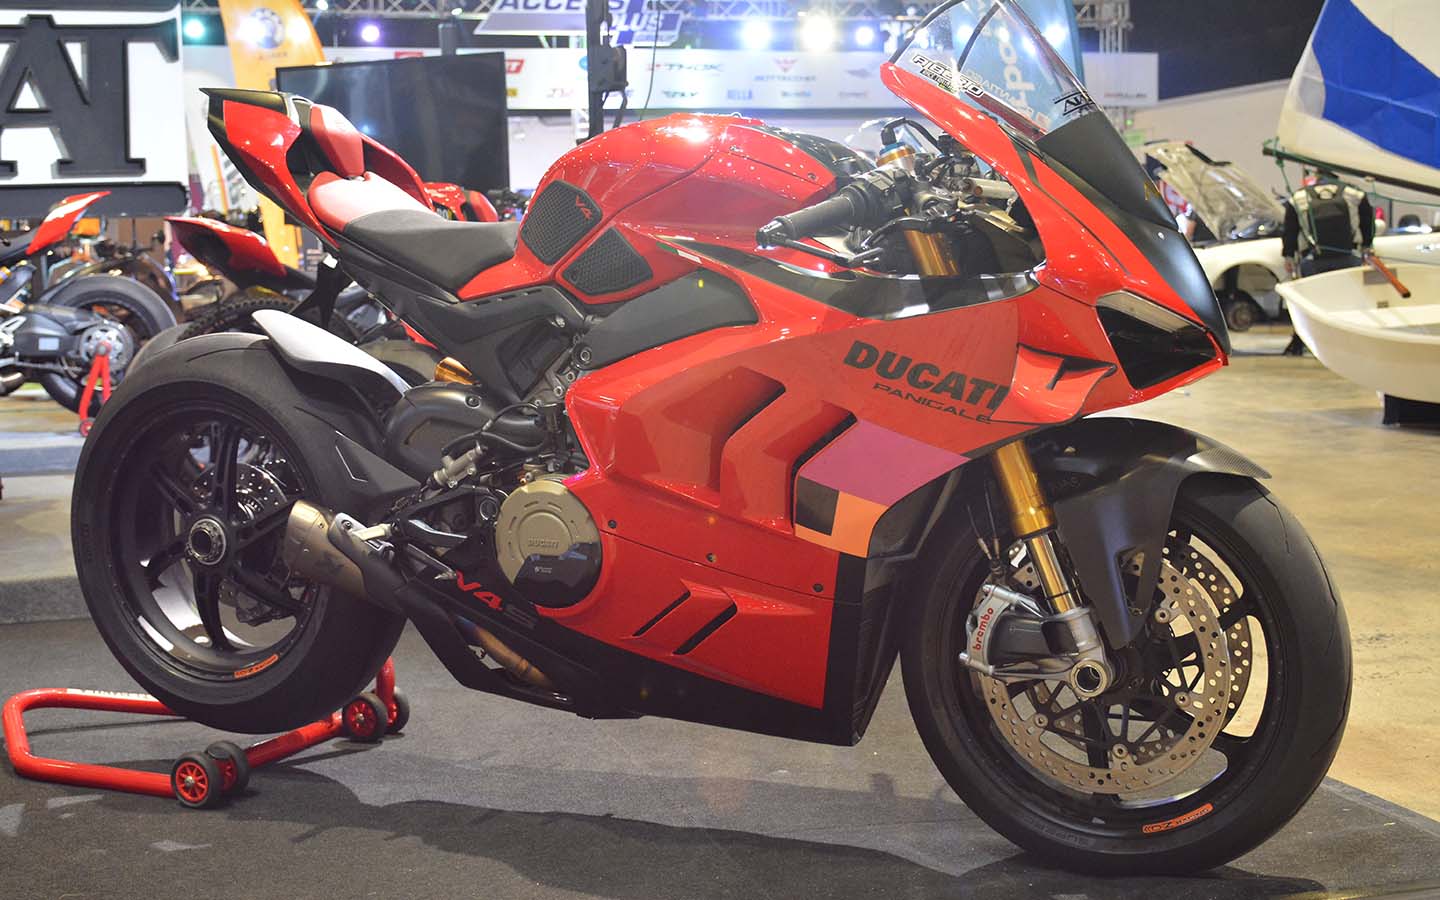 the Ducati Panigale is one of the top 10 fastest motorcycles in the world